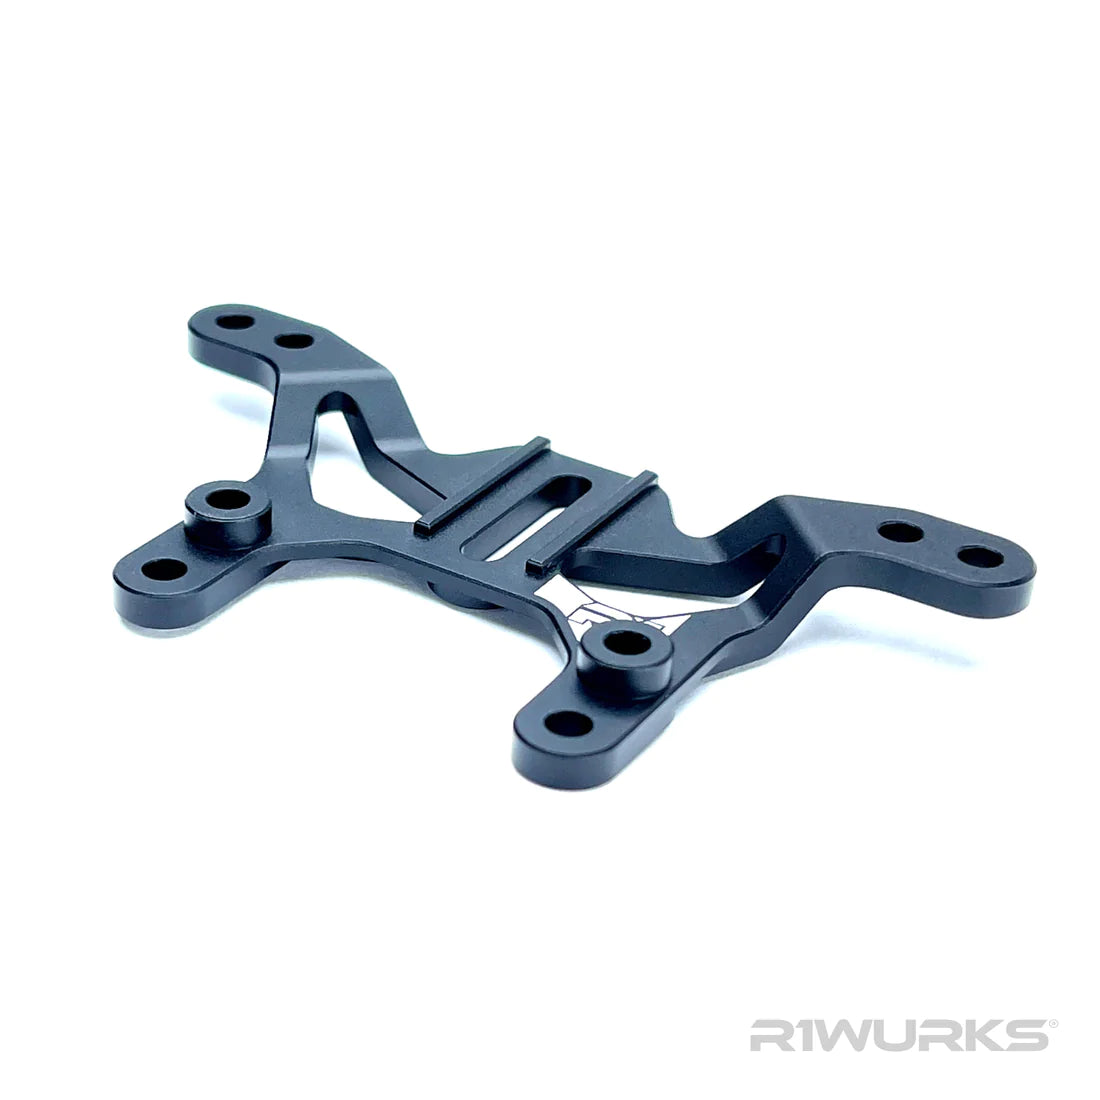 R1WURKS DC1 Front Shock Tower, Aluminum